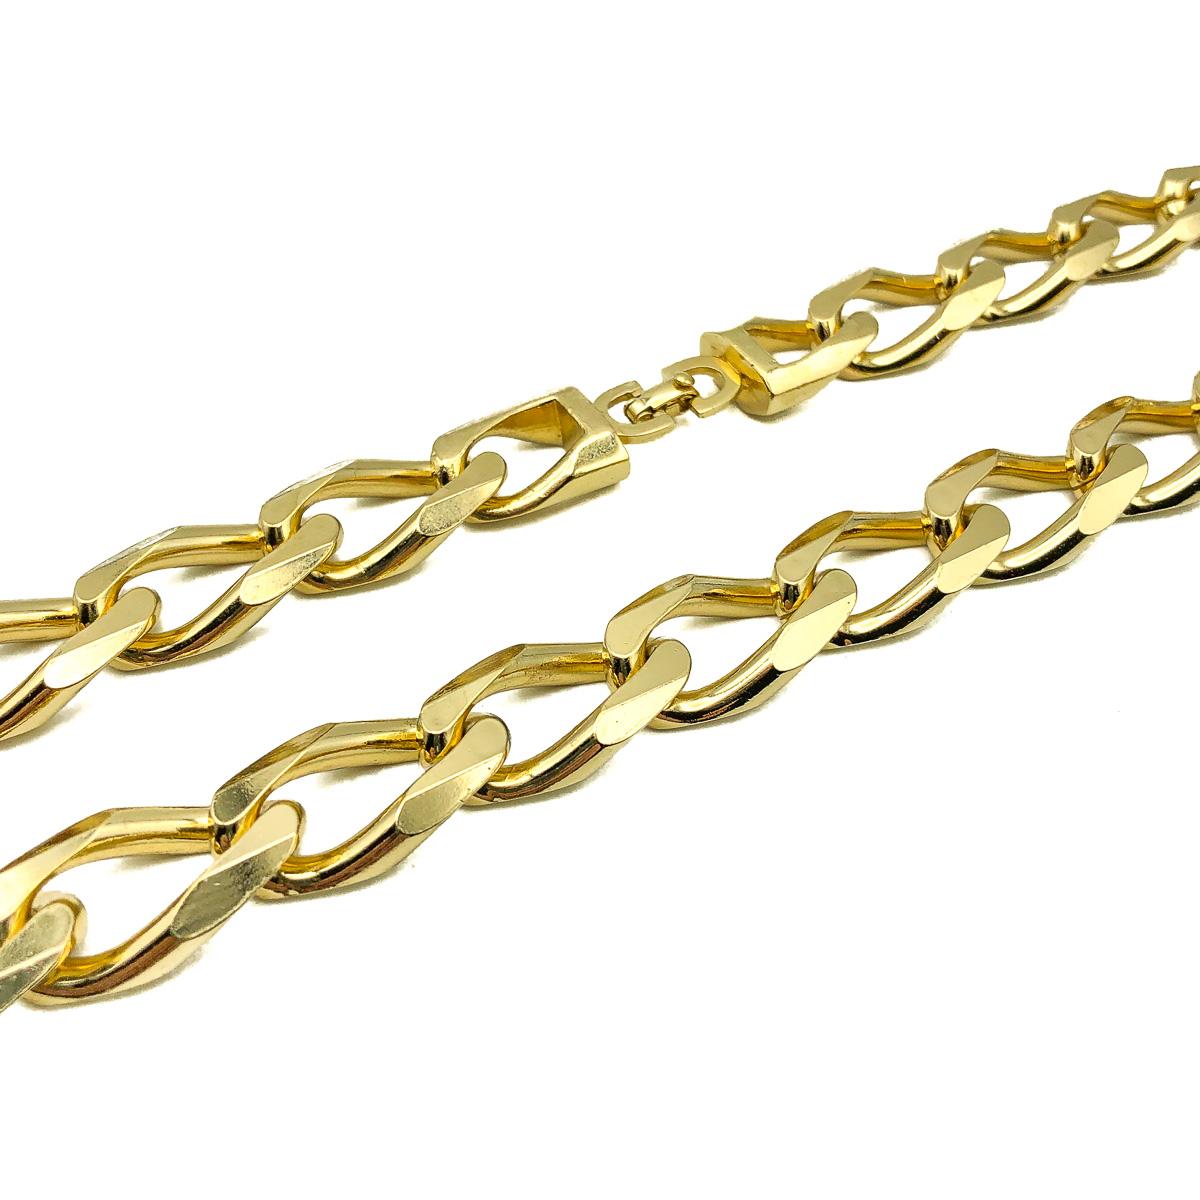 A show stopping Vintage Dior Chunky Link Chain. Weighty, large links crafted in gold plated metal. Very good vintage condition, 43.5cms. A brilliantly stylish necklace from the Dior archive which will be forever in style and achingly en trend right